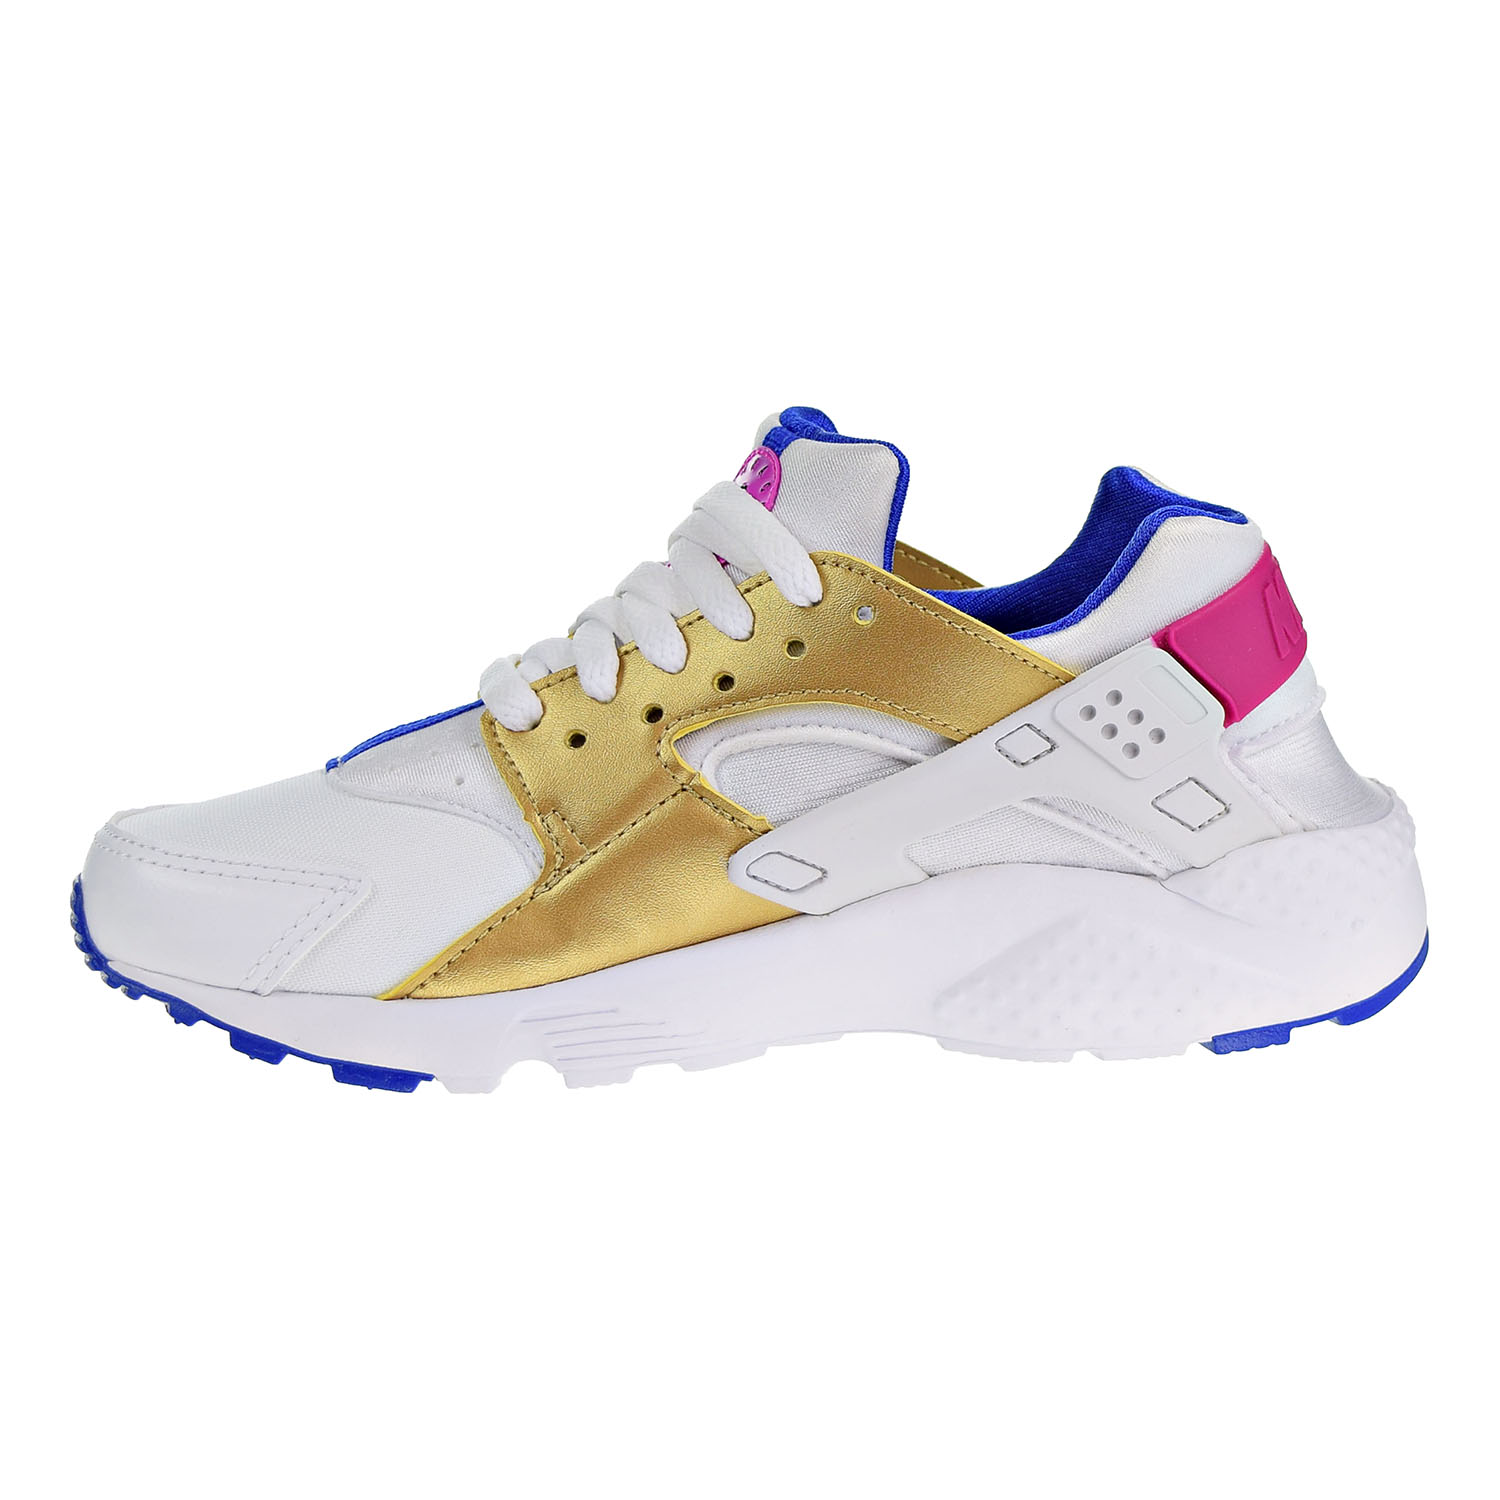 recommend State every time Nike Huarache Run (GS) Big Kids Shoes White/Metallic Gold/Racer Blue  654280-109 (6 M US)